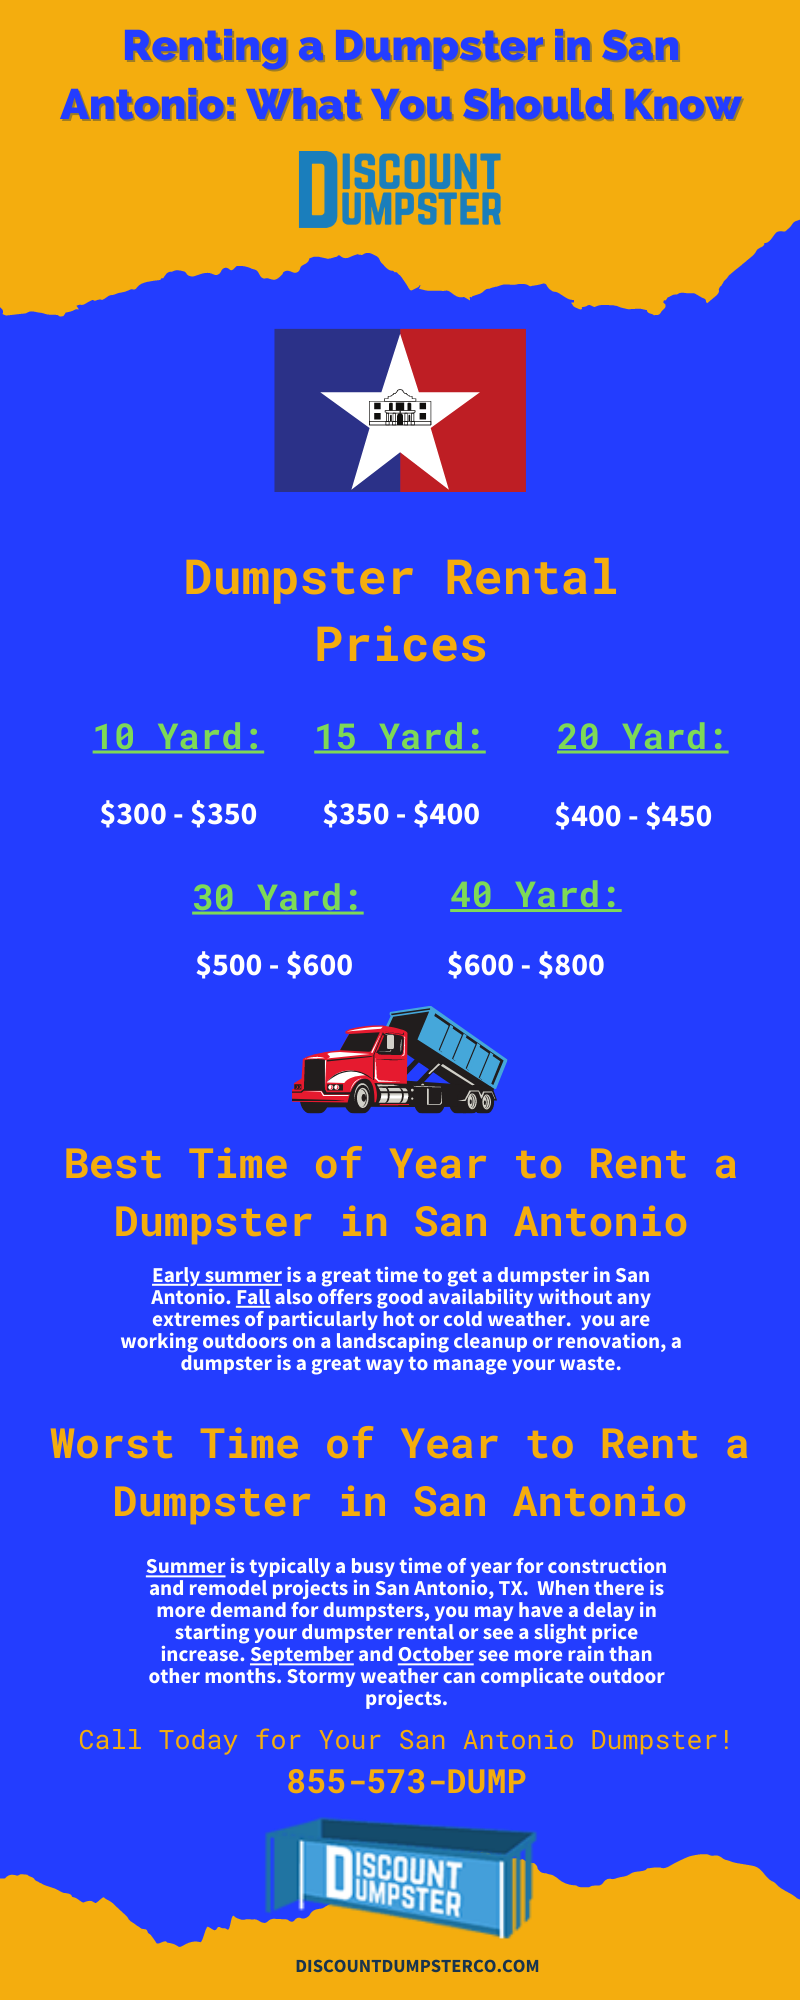 An infographic on what you should know when renting a dumpster in San Antonio